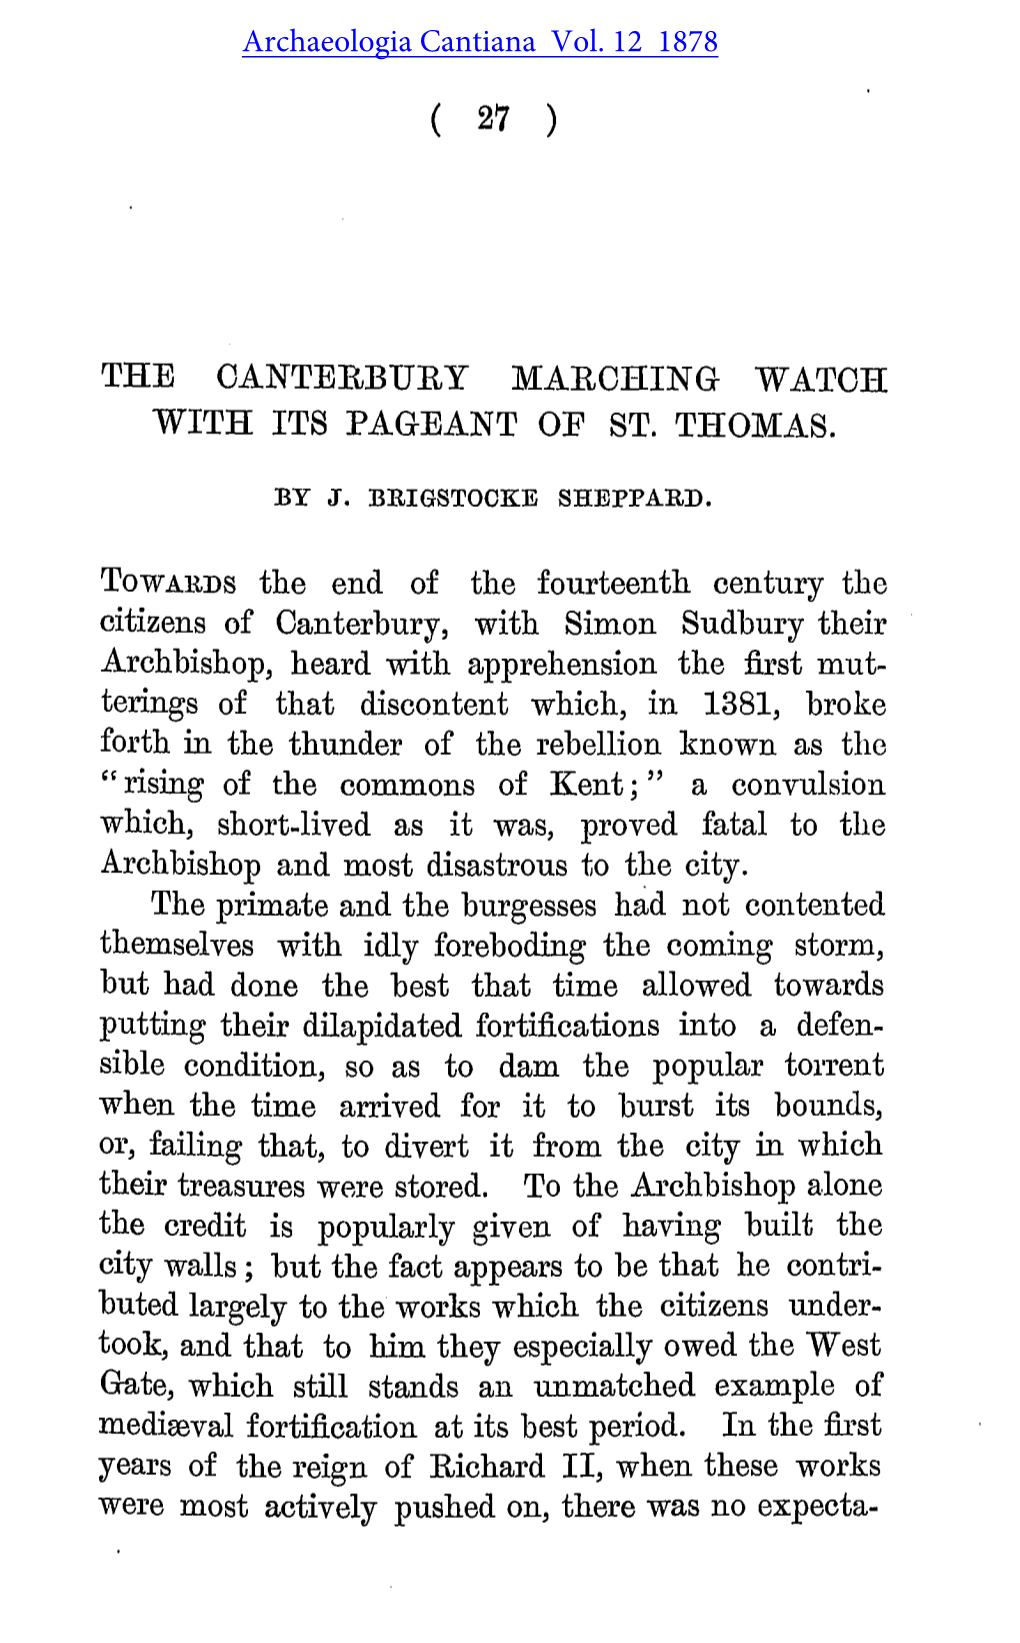 The Canterbury Marching Watch and Its Pageant of St Thomas